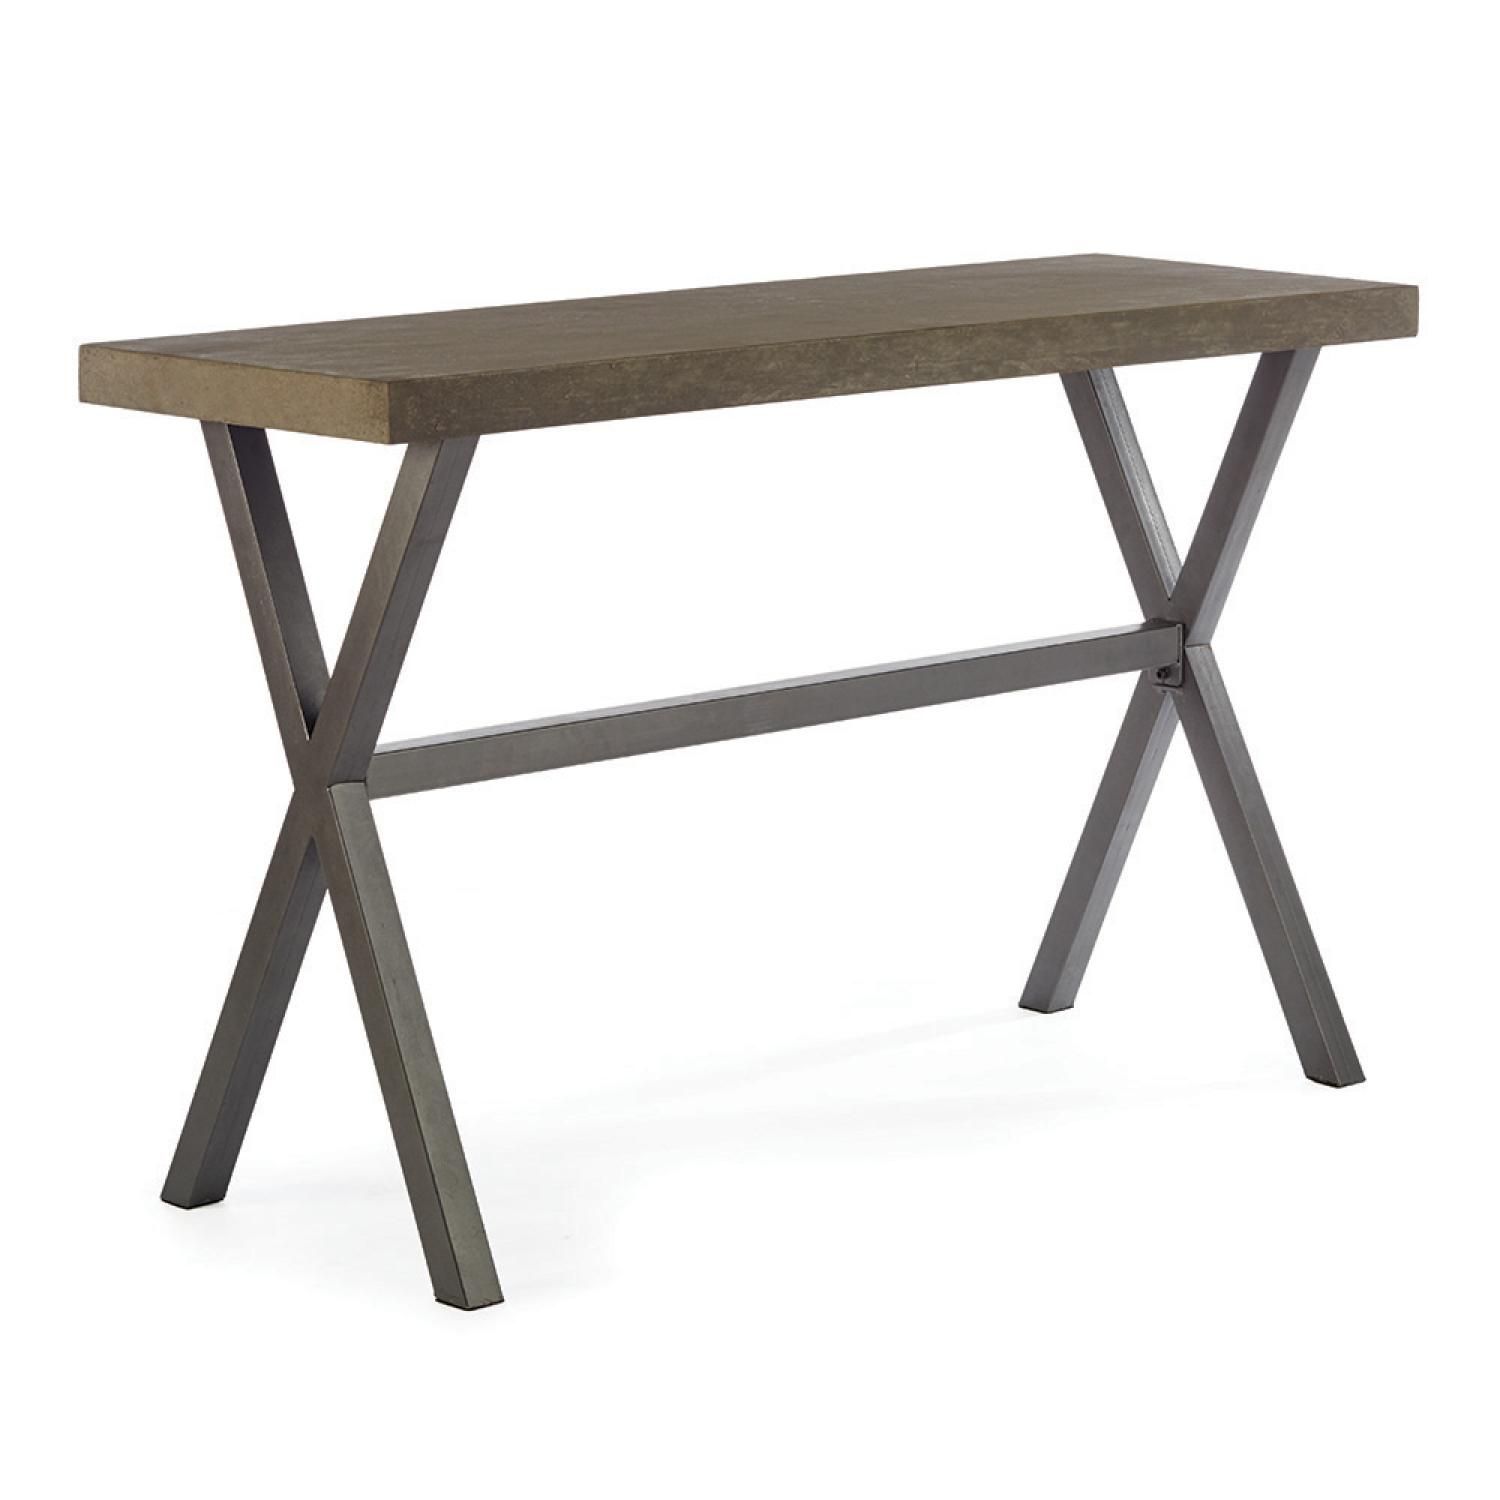 59" Concrete And Iron Indoor Outdoor Rectangular Console Table With Regard To Metal Console Tables (View 13 of 20)